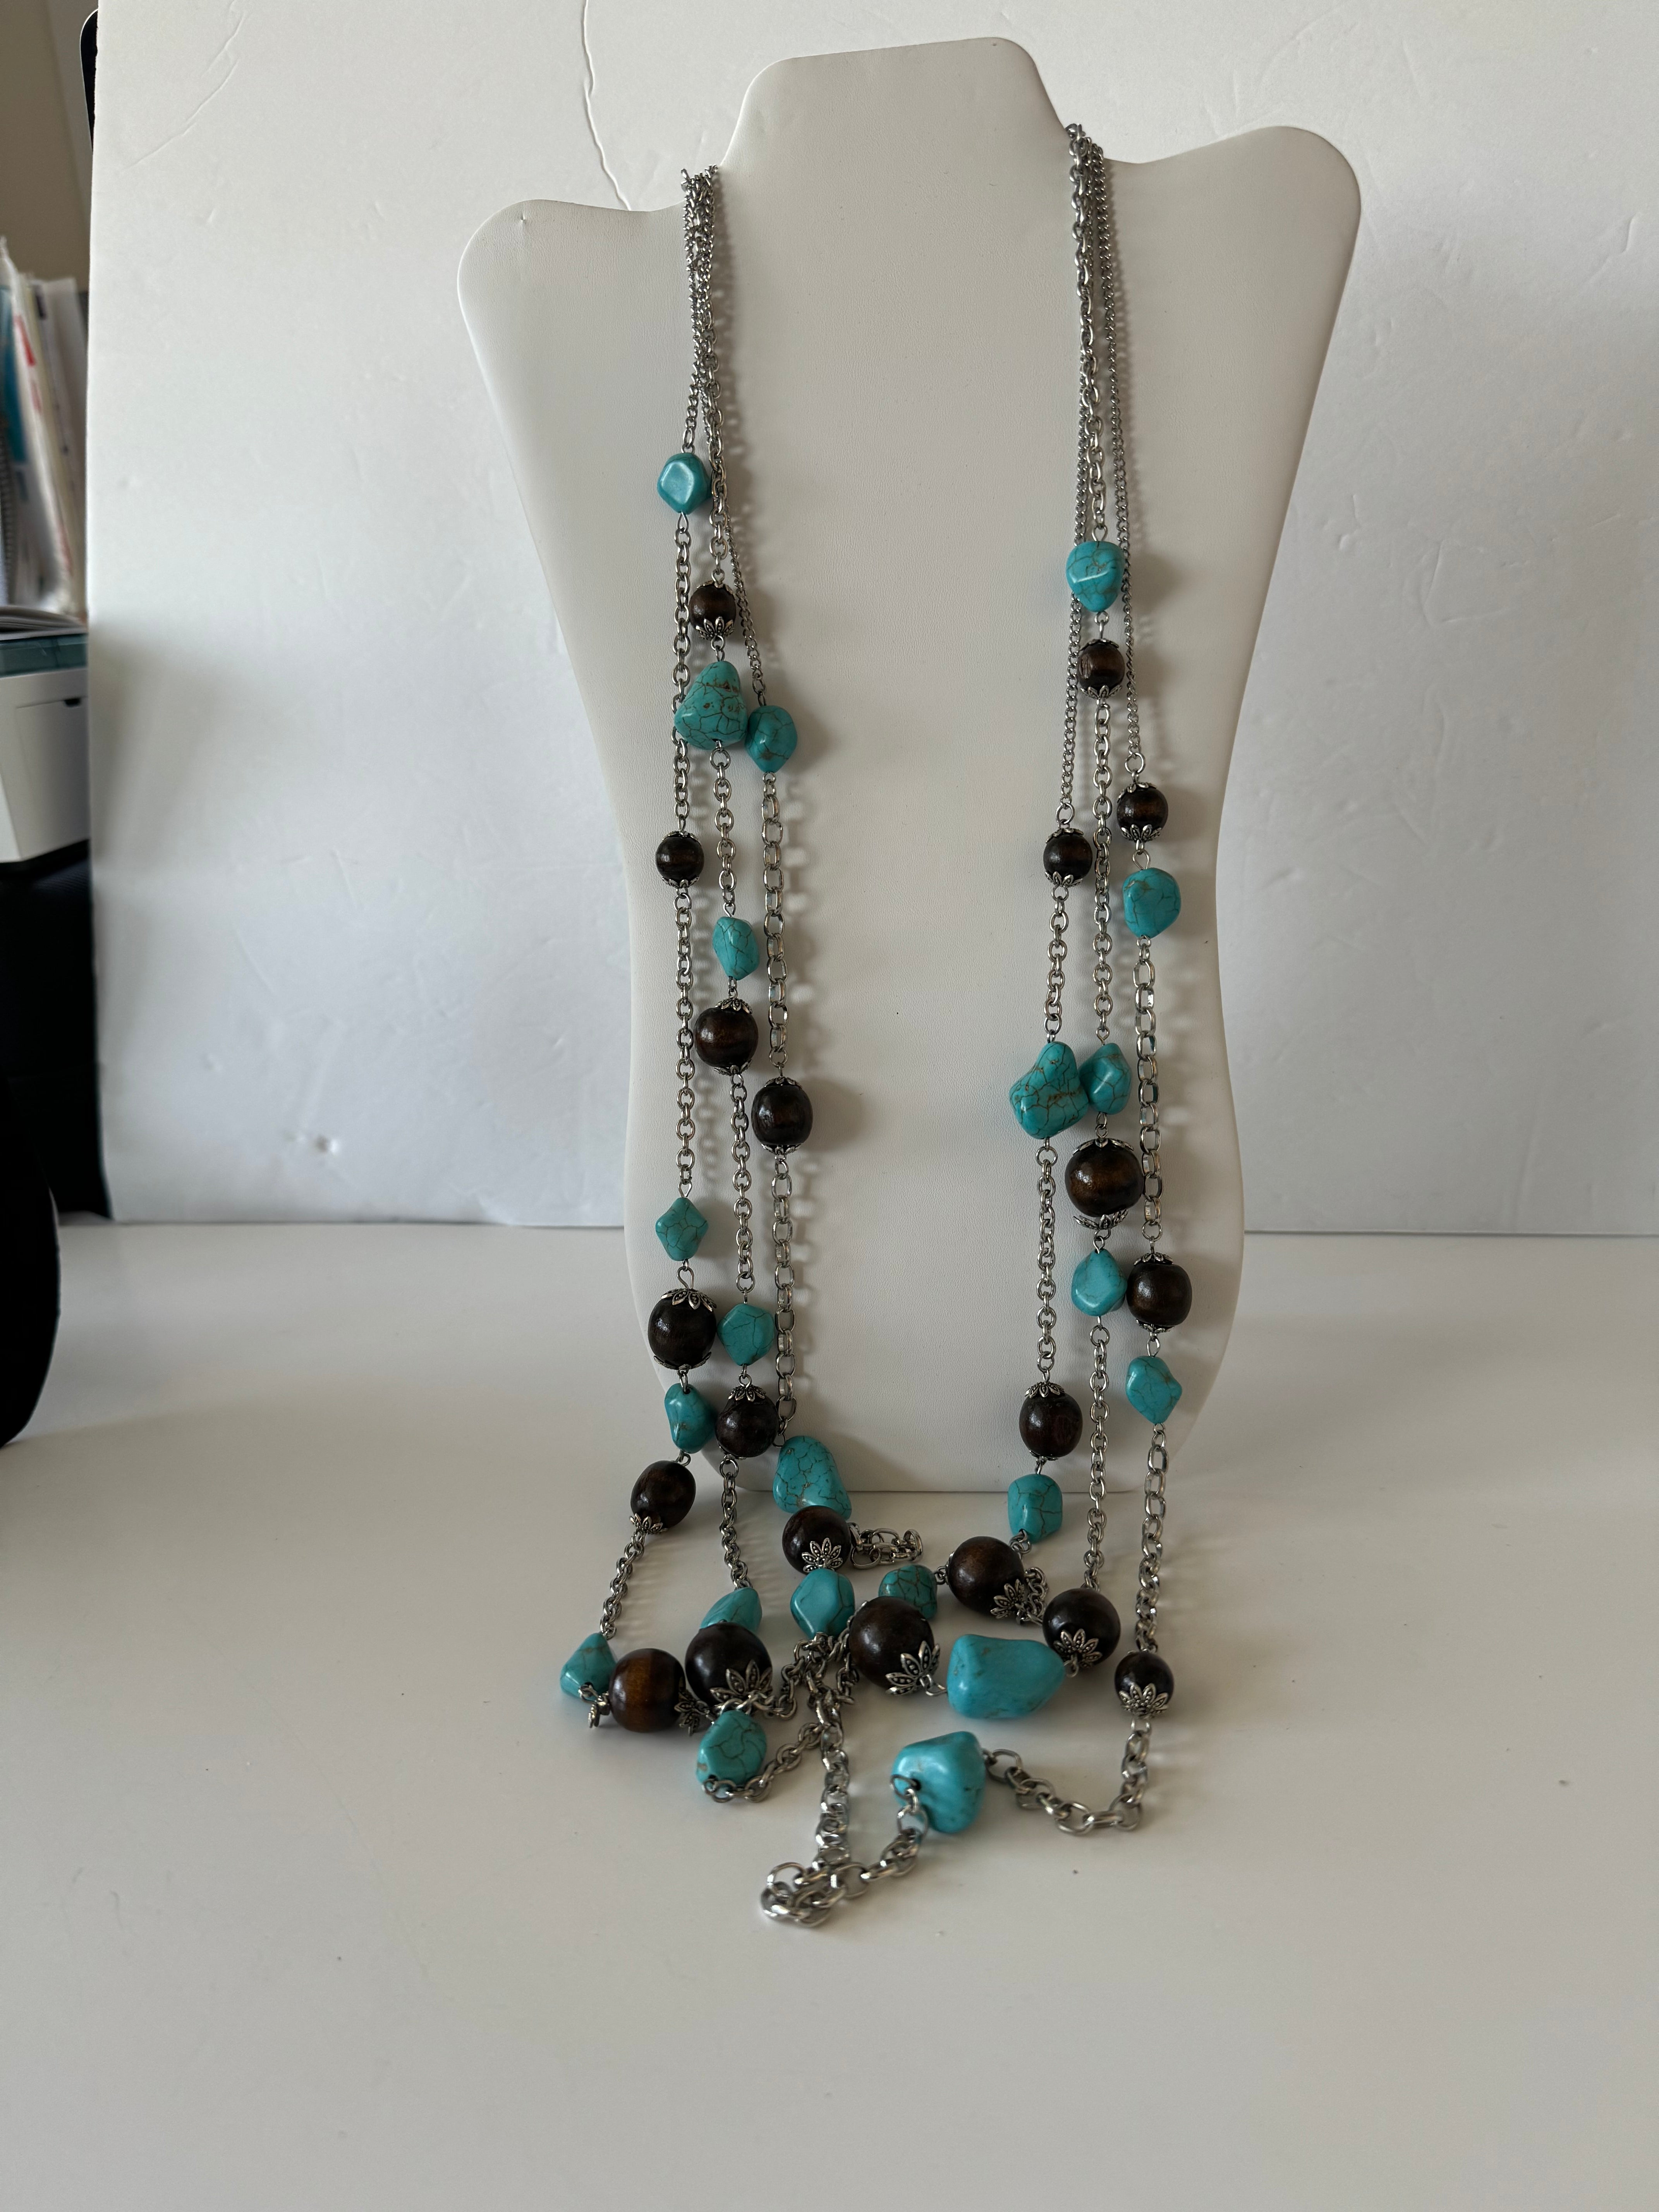 Turquoise Stone and Brown Wood Beads Necklace - Catalog No. HH-51